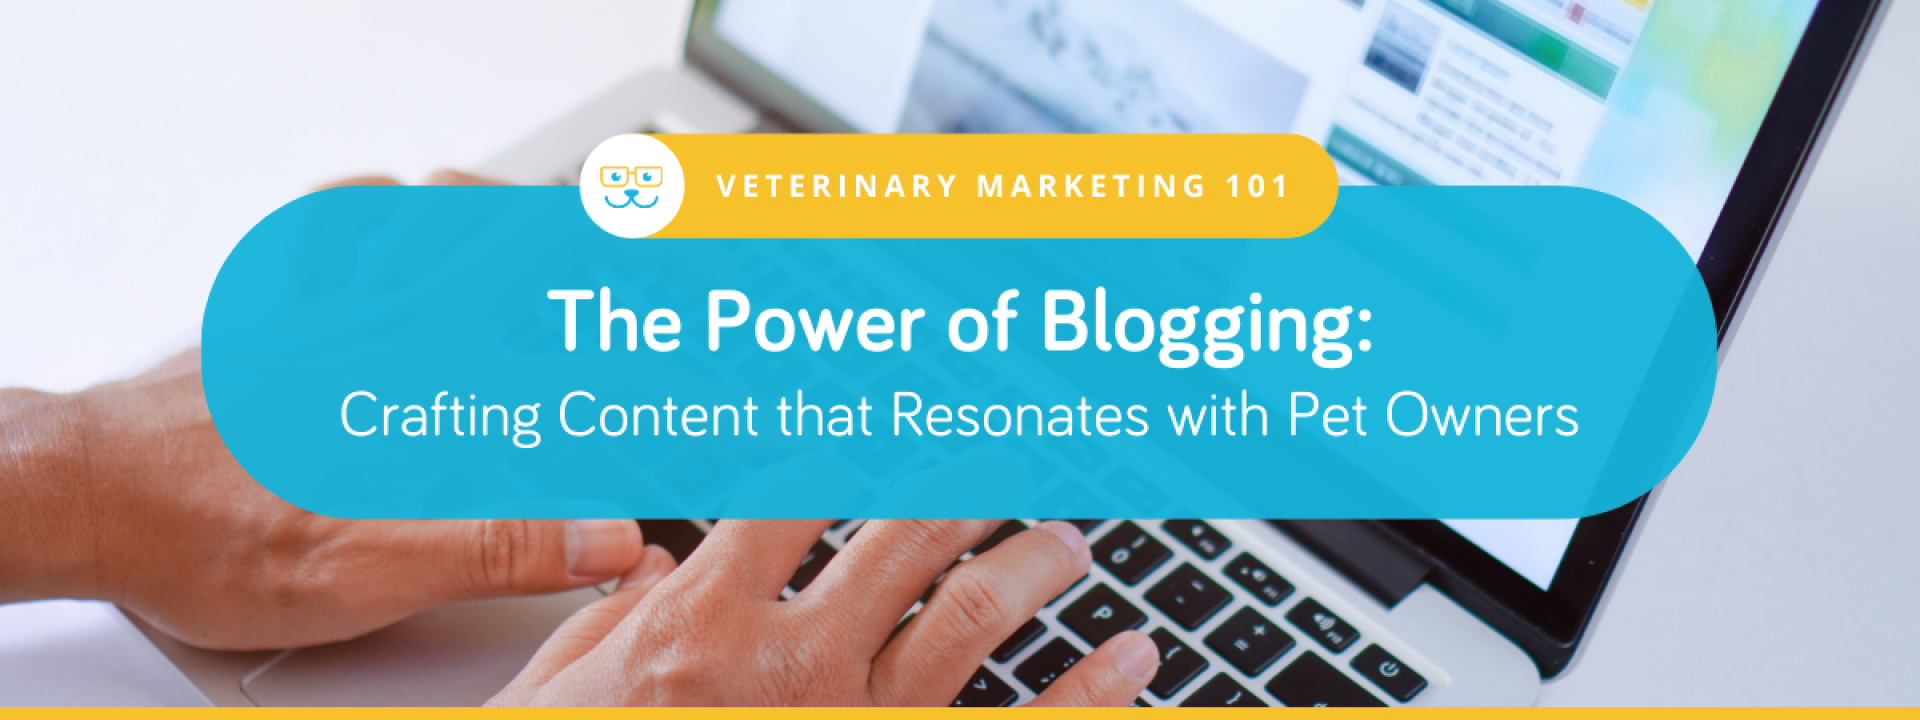 Text: The Power of Blogging Crafting Content that Resonates with Pet Owners